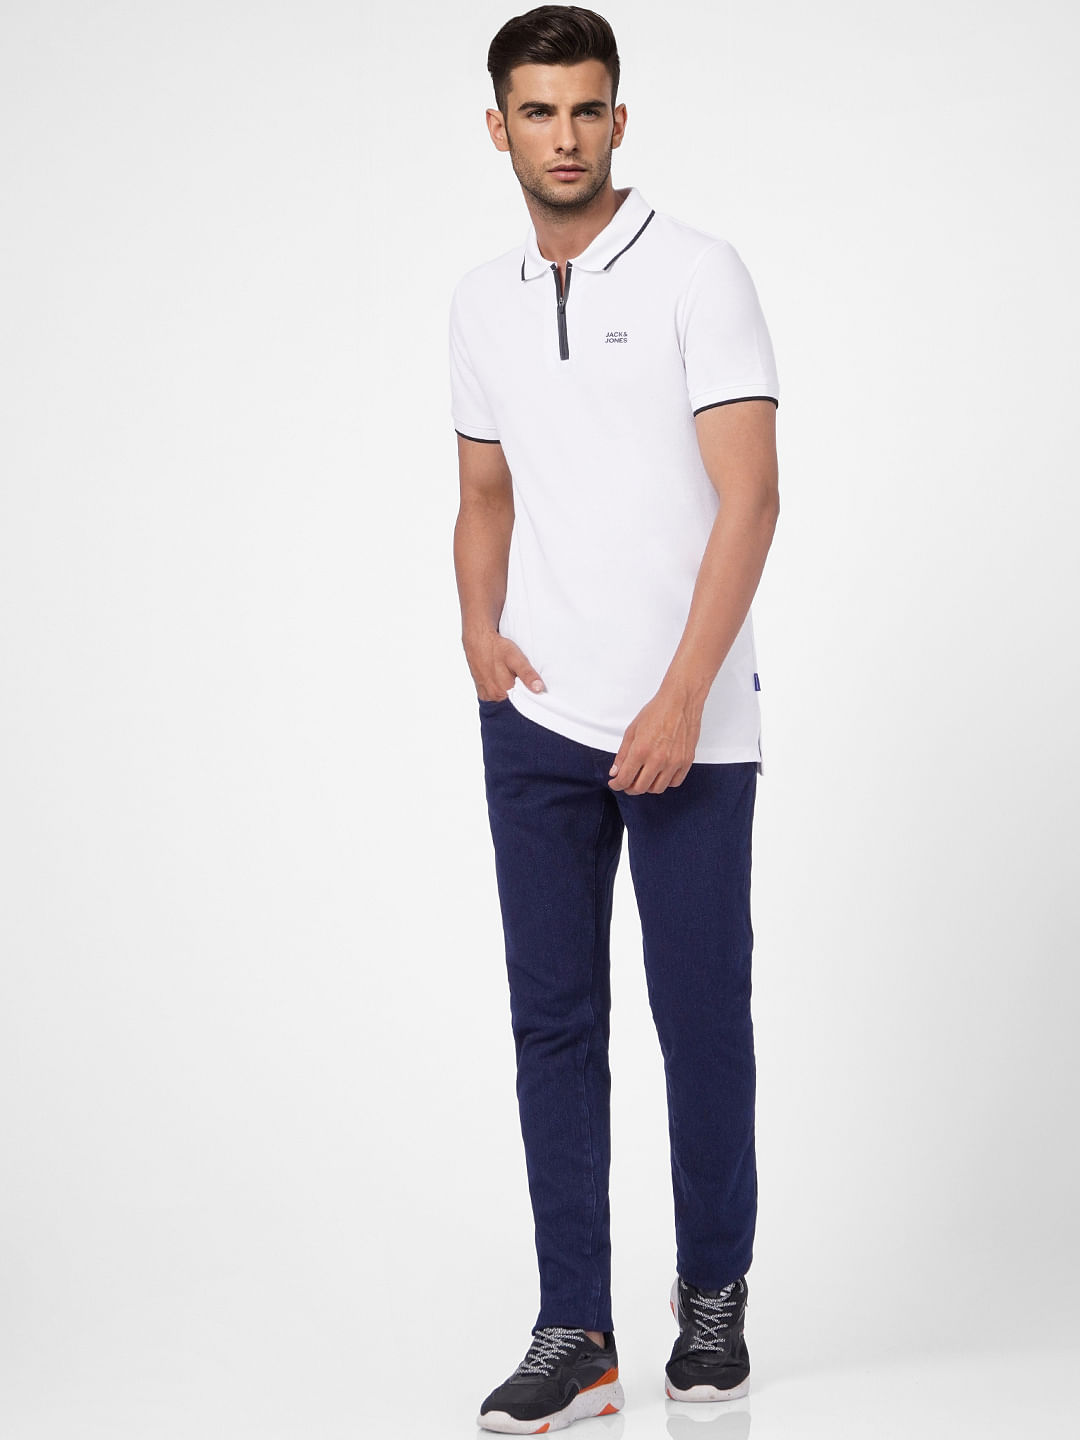 Men's White Crew-neck T-shirt, Navy Wool Cargo Pants, Black Leather  Loafers, Dark Brown Leather Belt | Lookastic